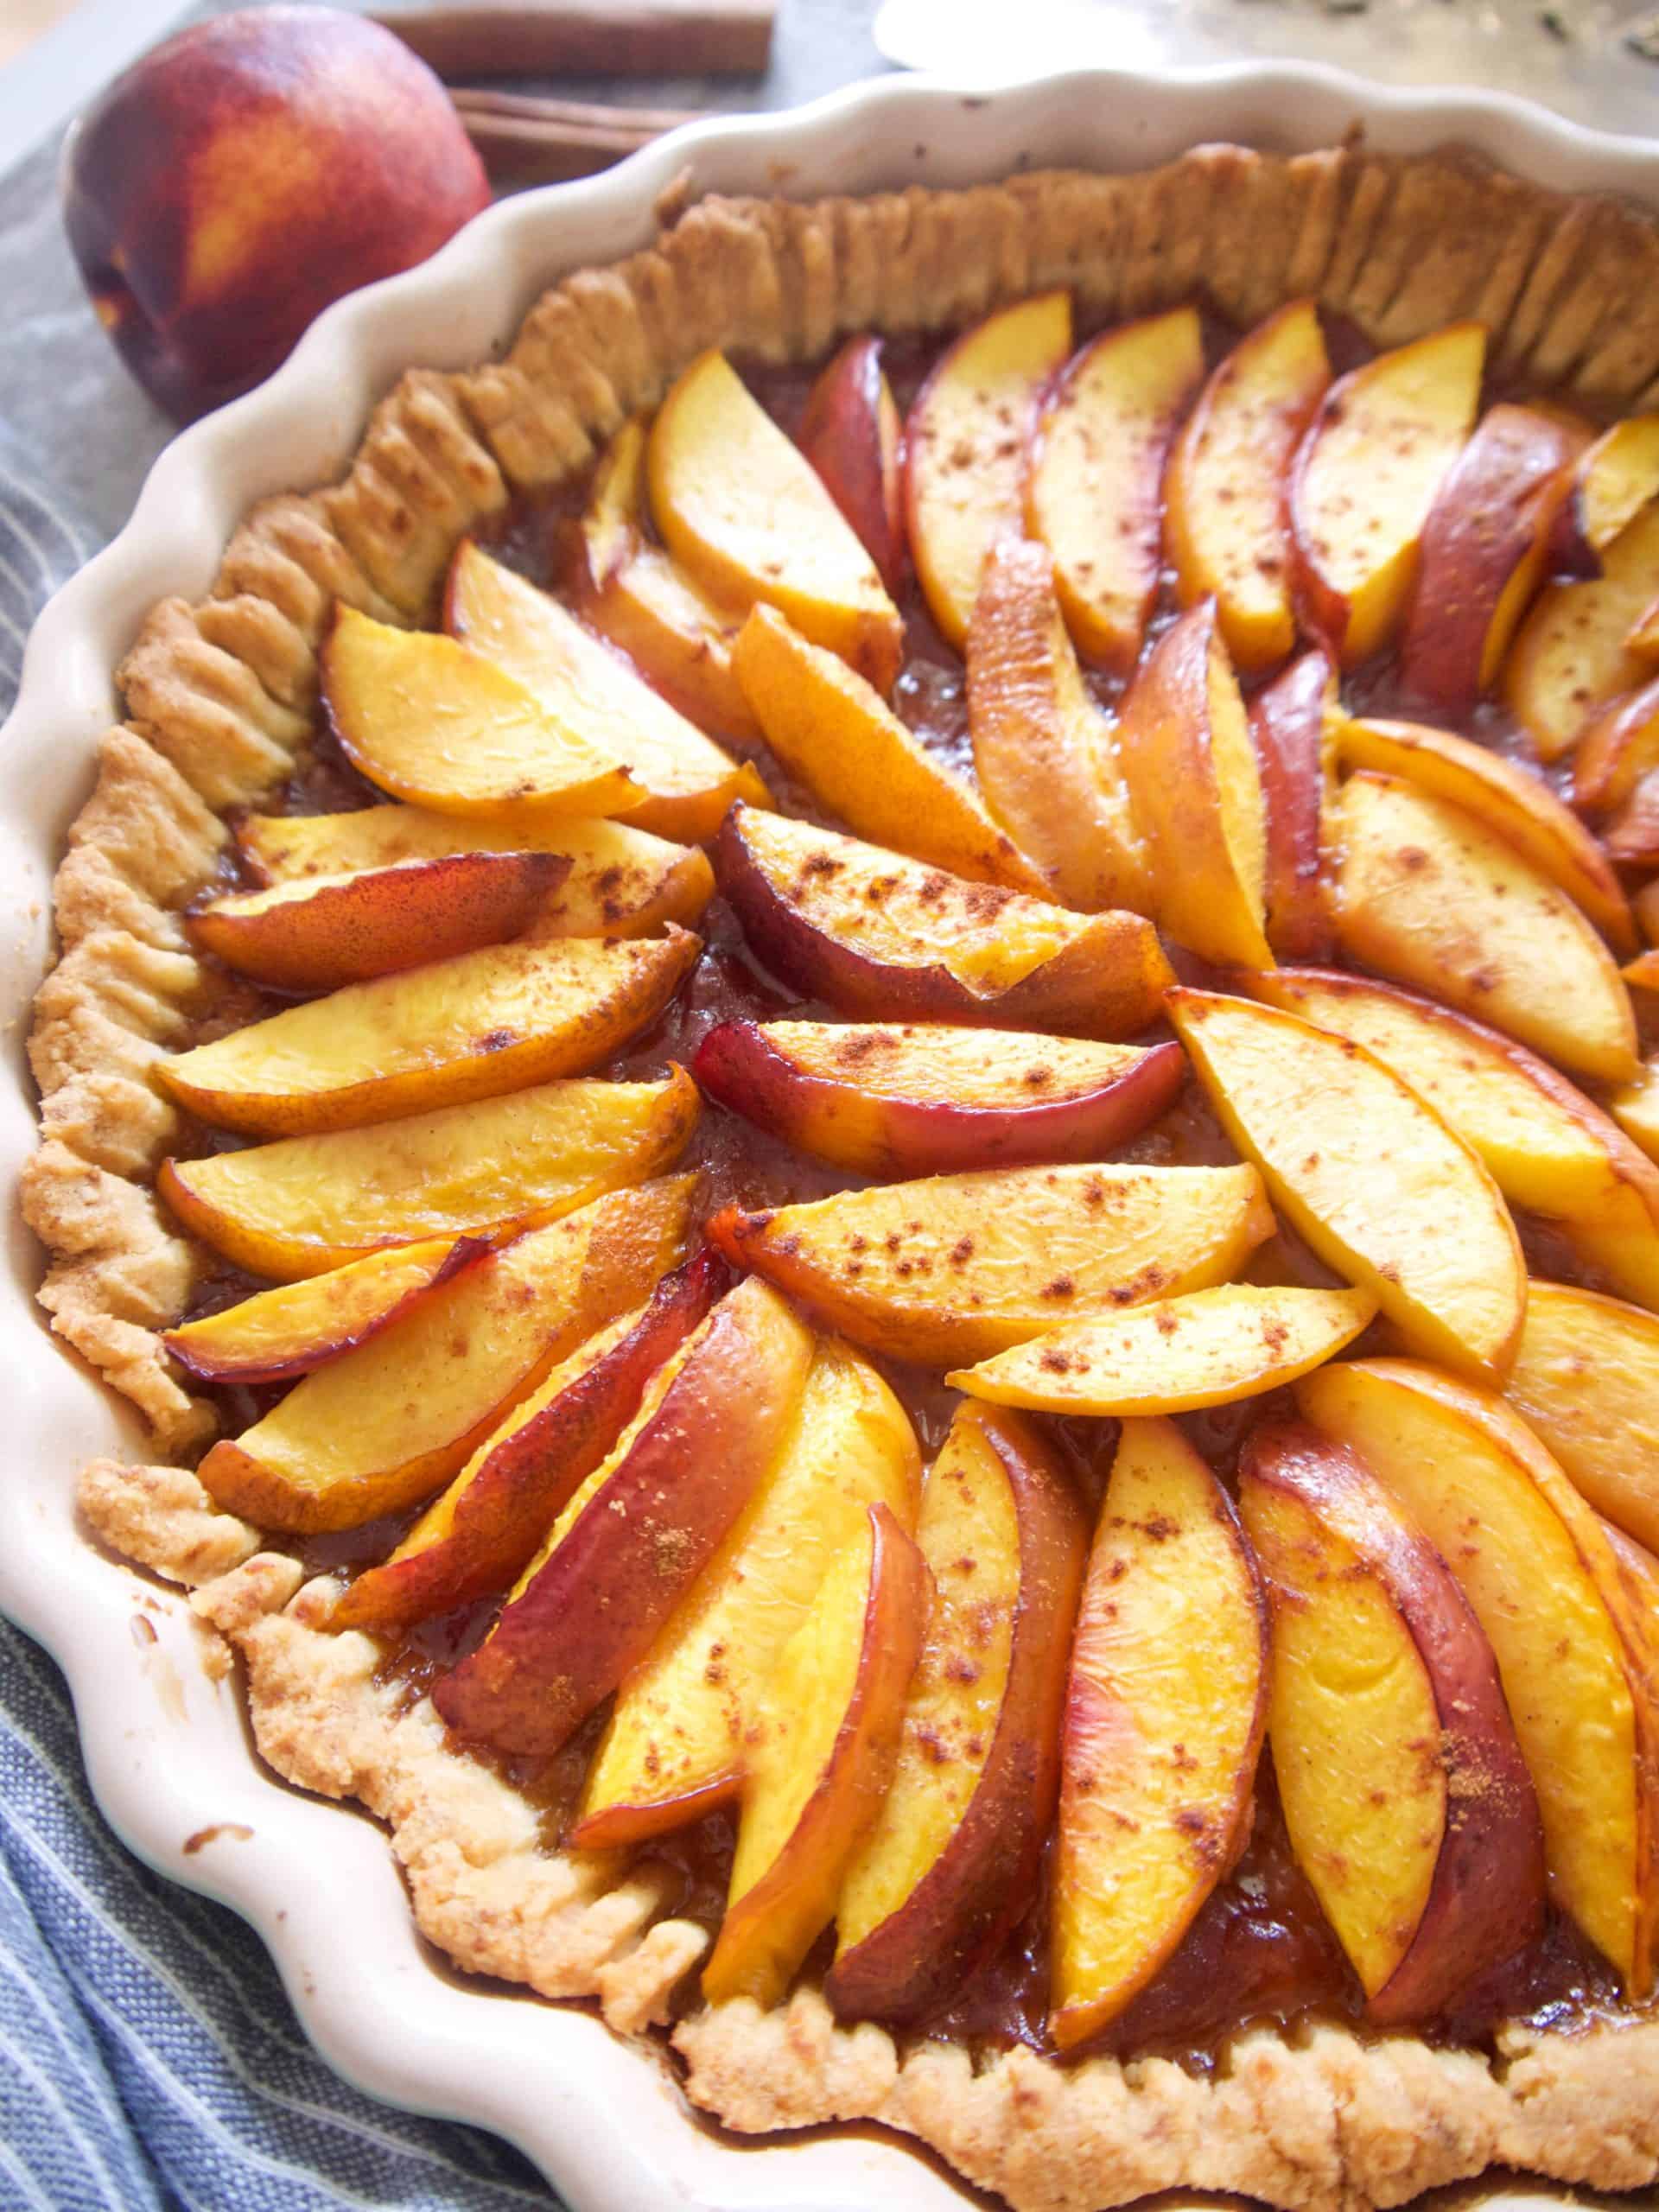 Dairy free nectarine tart fresh out of the oven.